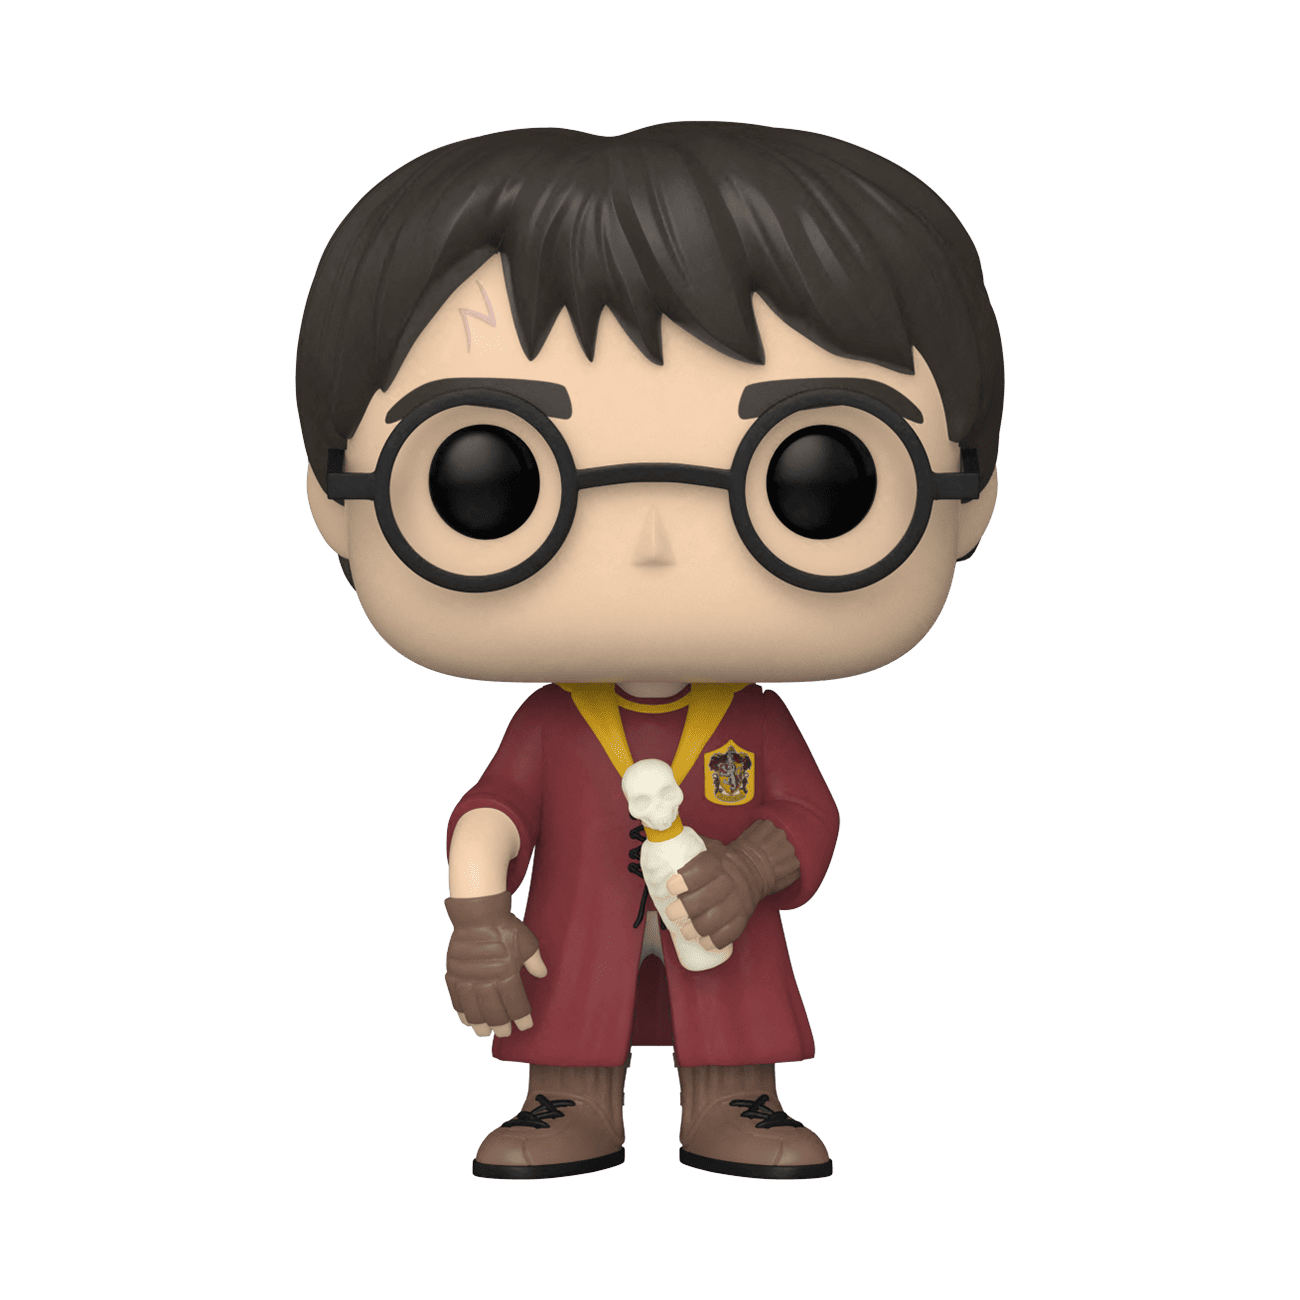 Buy Pop! Harry Potter with Potion Bottle at Funko.